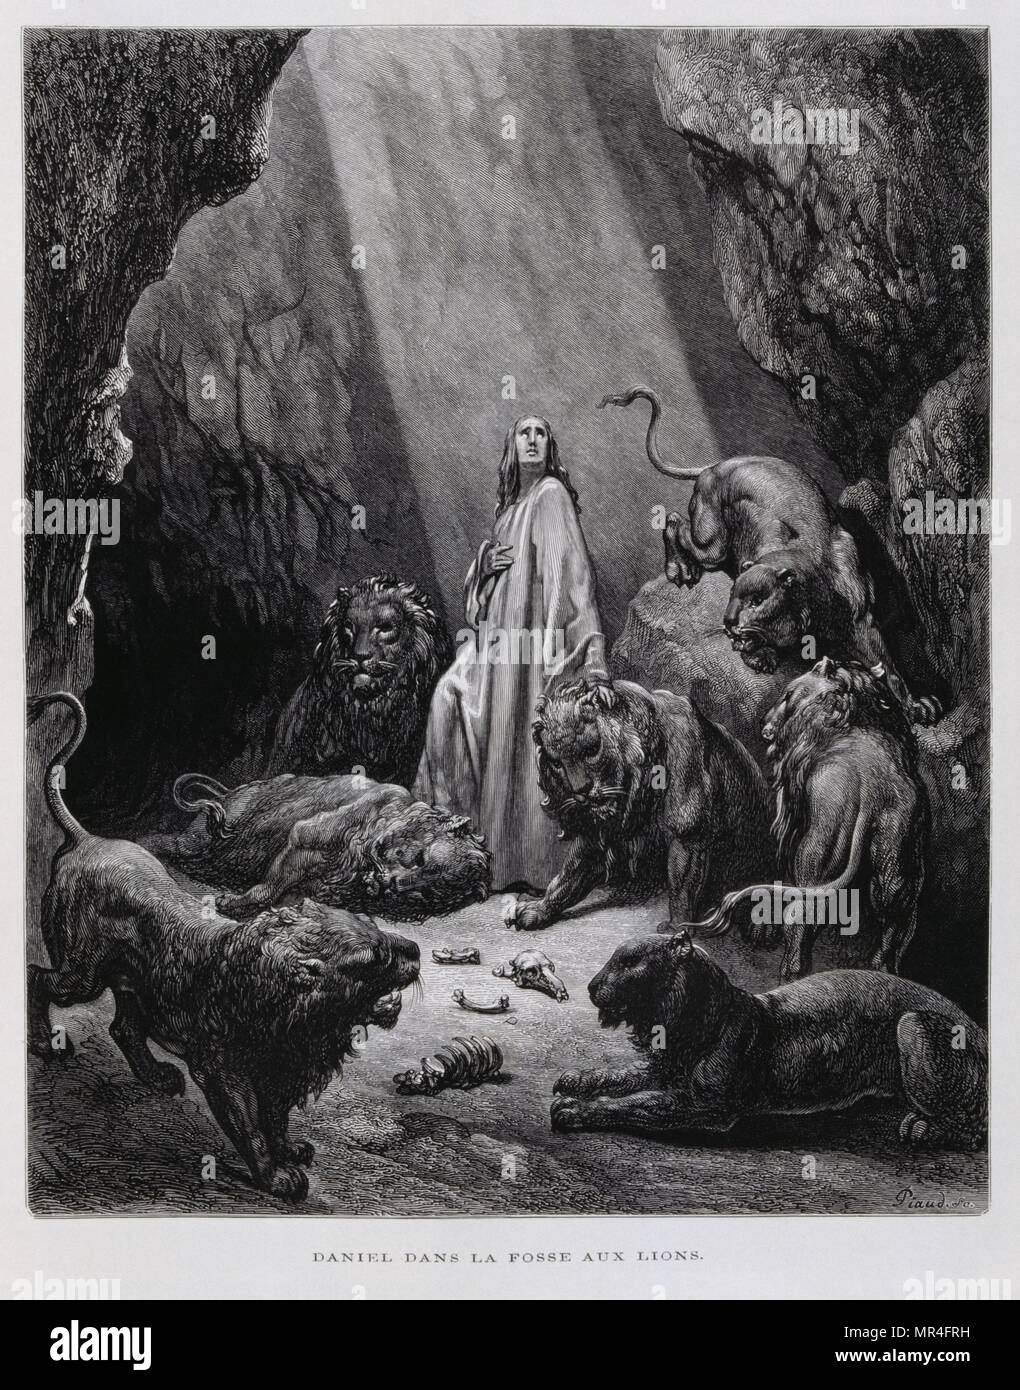 Daniel in the Lion's den, Illustration from the Dore Bible 1866. In 1866, the French artist and illustrator Gustave Doré (1832–1883), published a series of 241 wood engravings for a new deluxe edition of the 1843 French translation of the Vulgate Bible, popularly known as the Bible de Tours. This new edition was known as La Grande Bible de Tours and its illustrations were immensely successful. Stock Photo